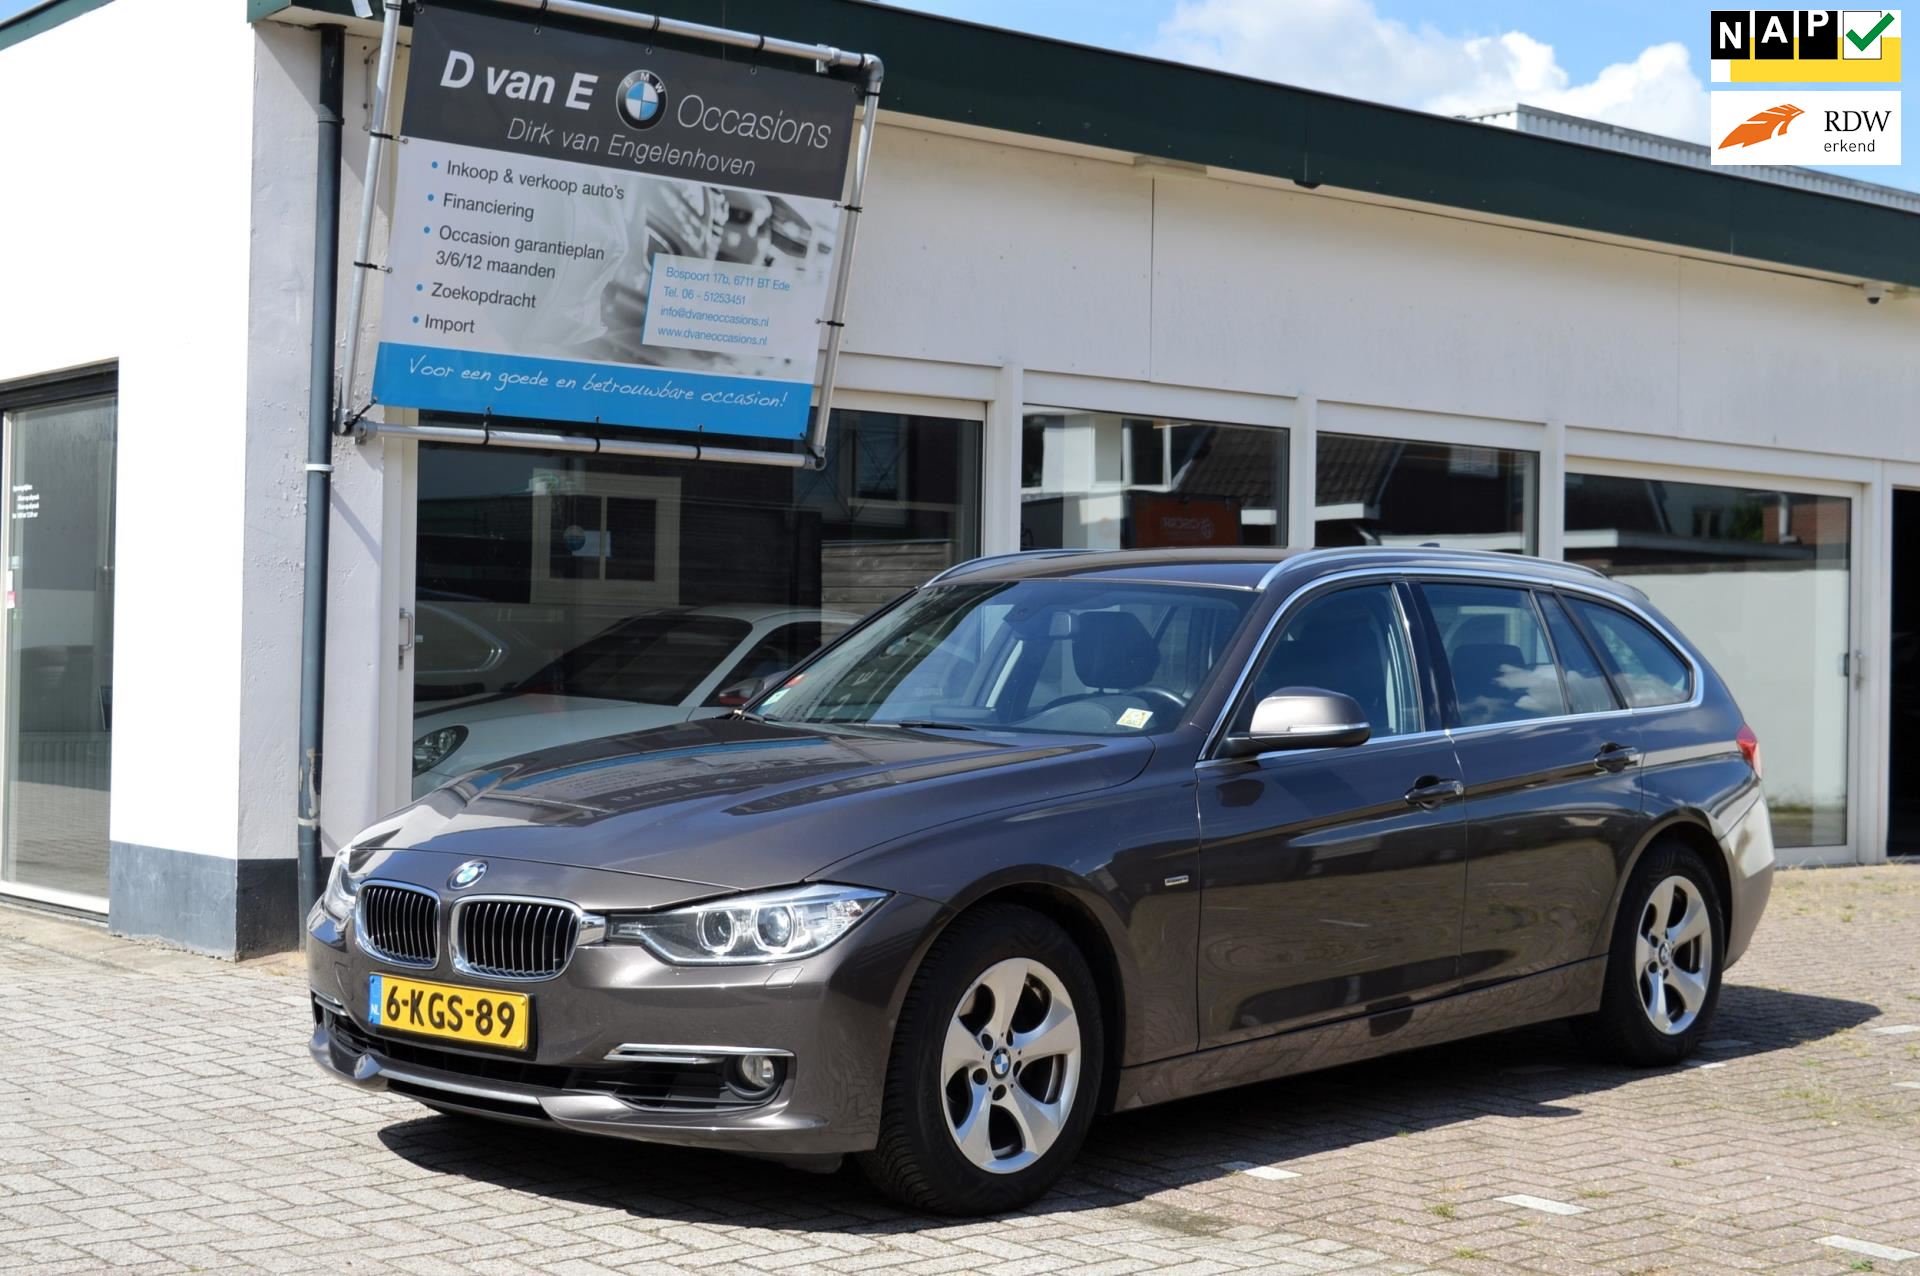 BMW 3-serie Touring occasion - D van E BMW Occasions